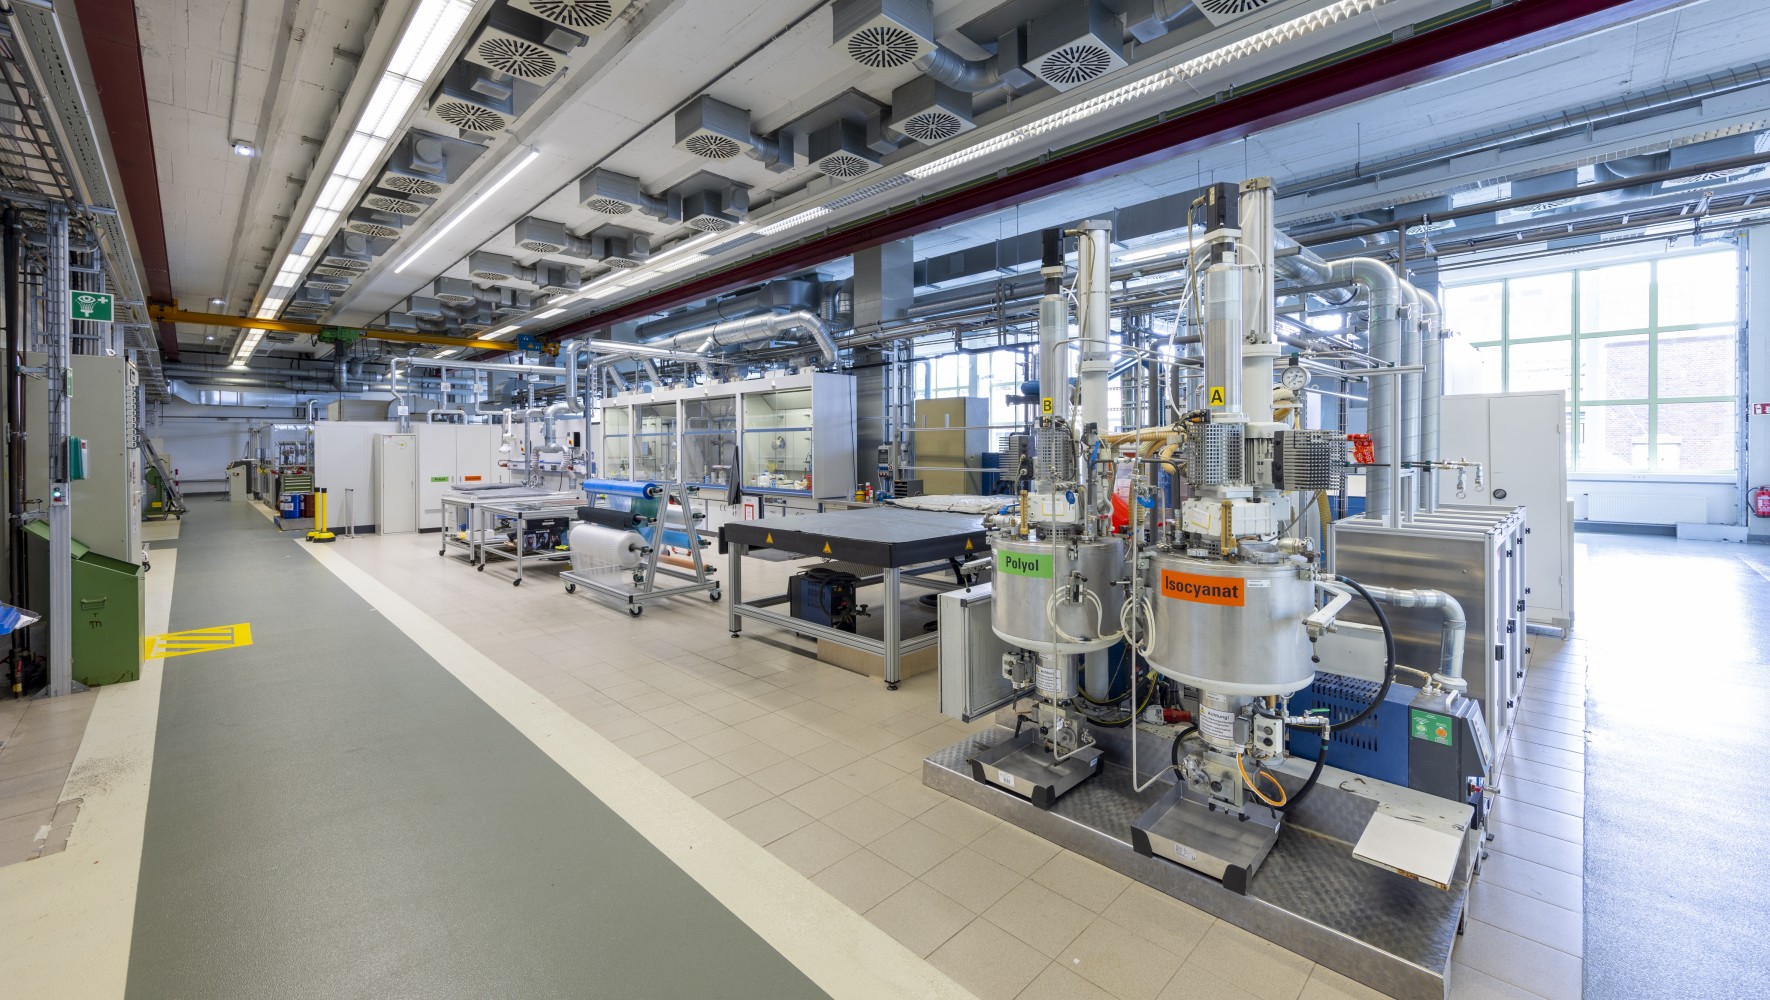 Chemical development and application technology go hand in hand at the Leverkusen Wind Technology Center